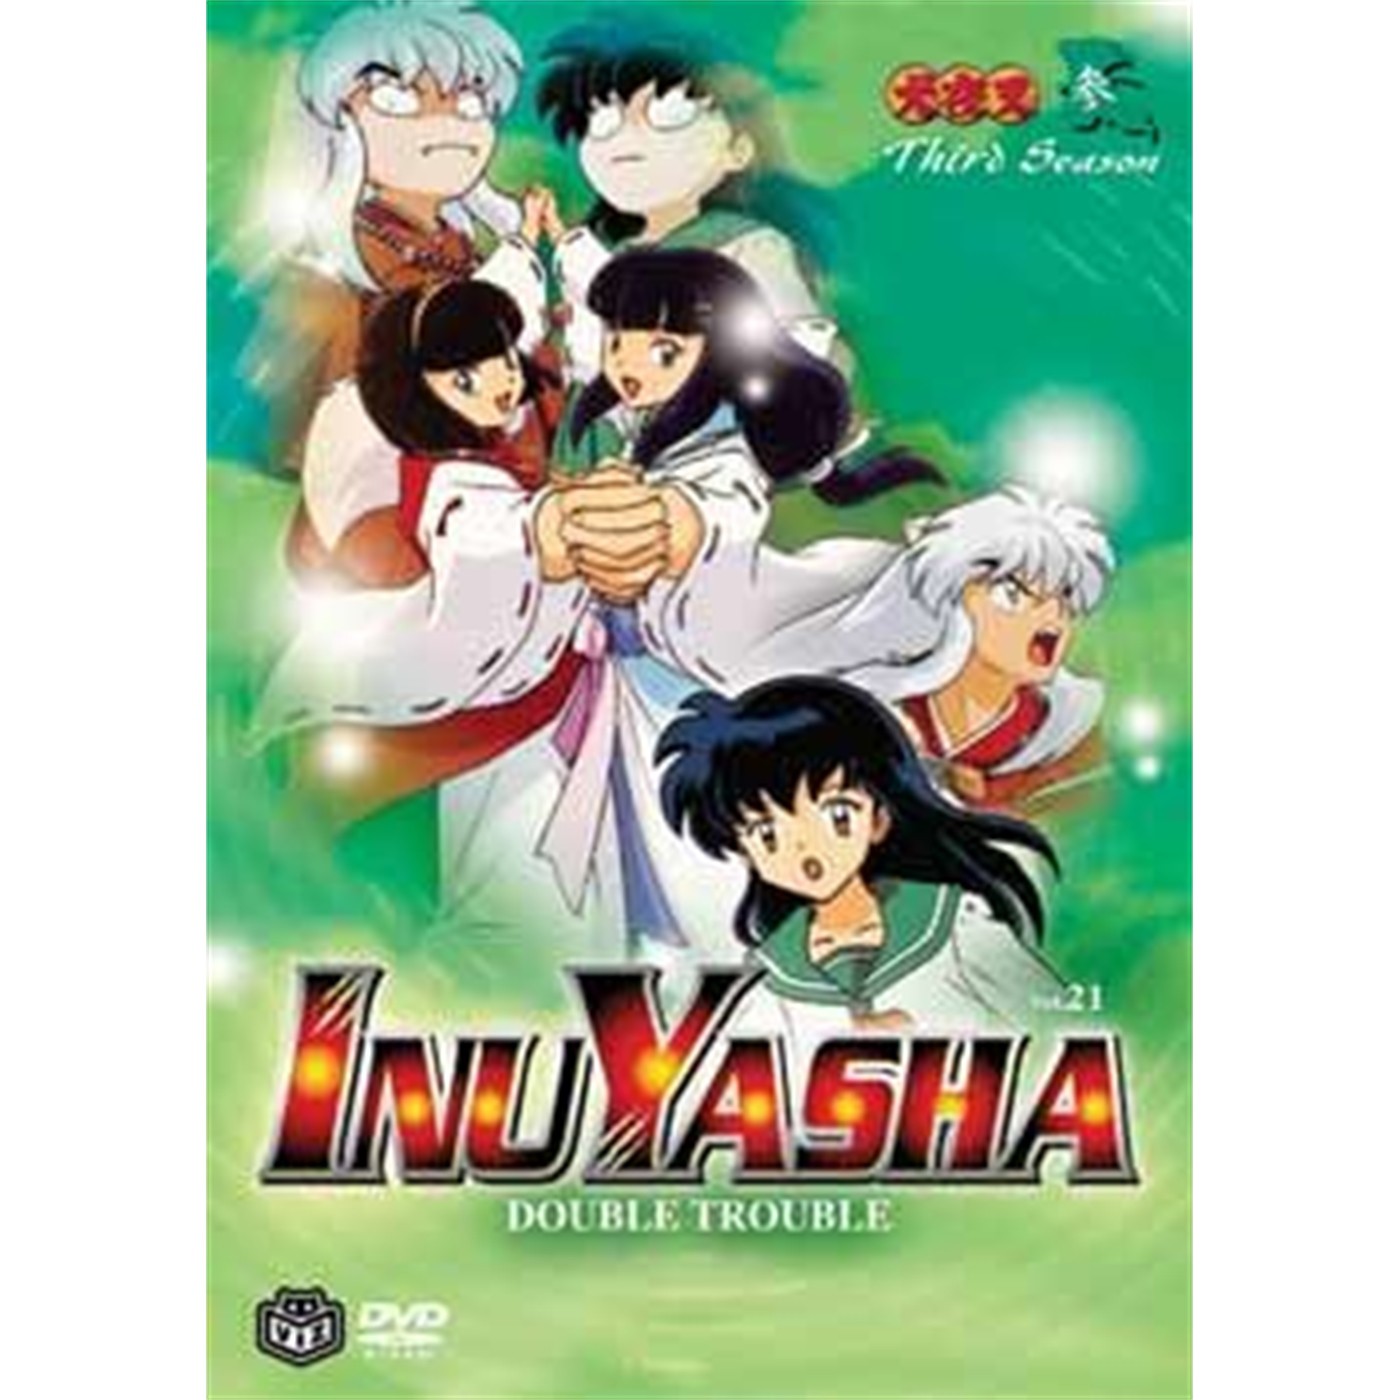 InuYasha, Vol. 21: Double Trouble (DVD)